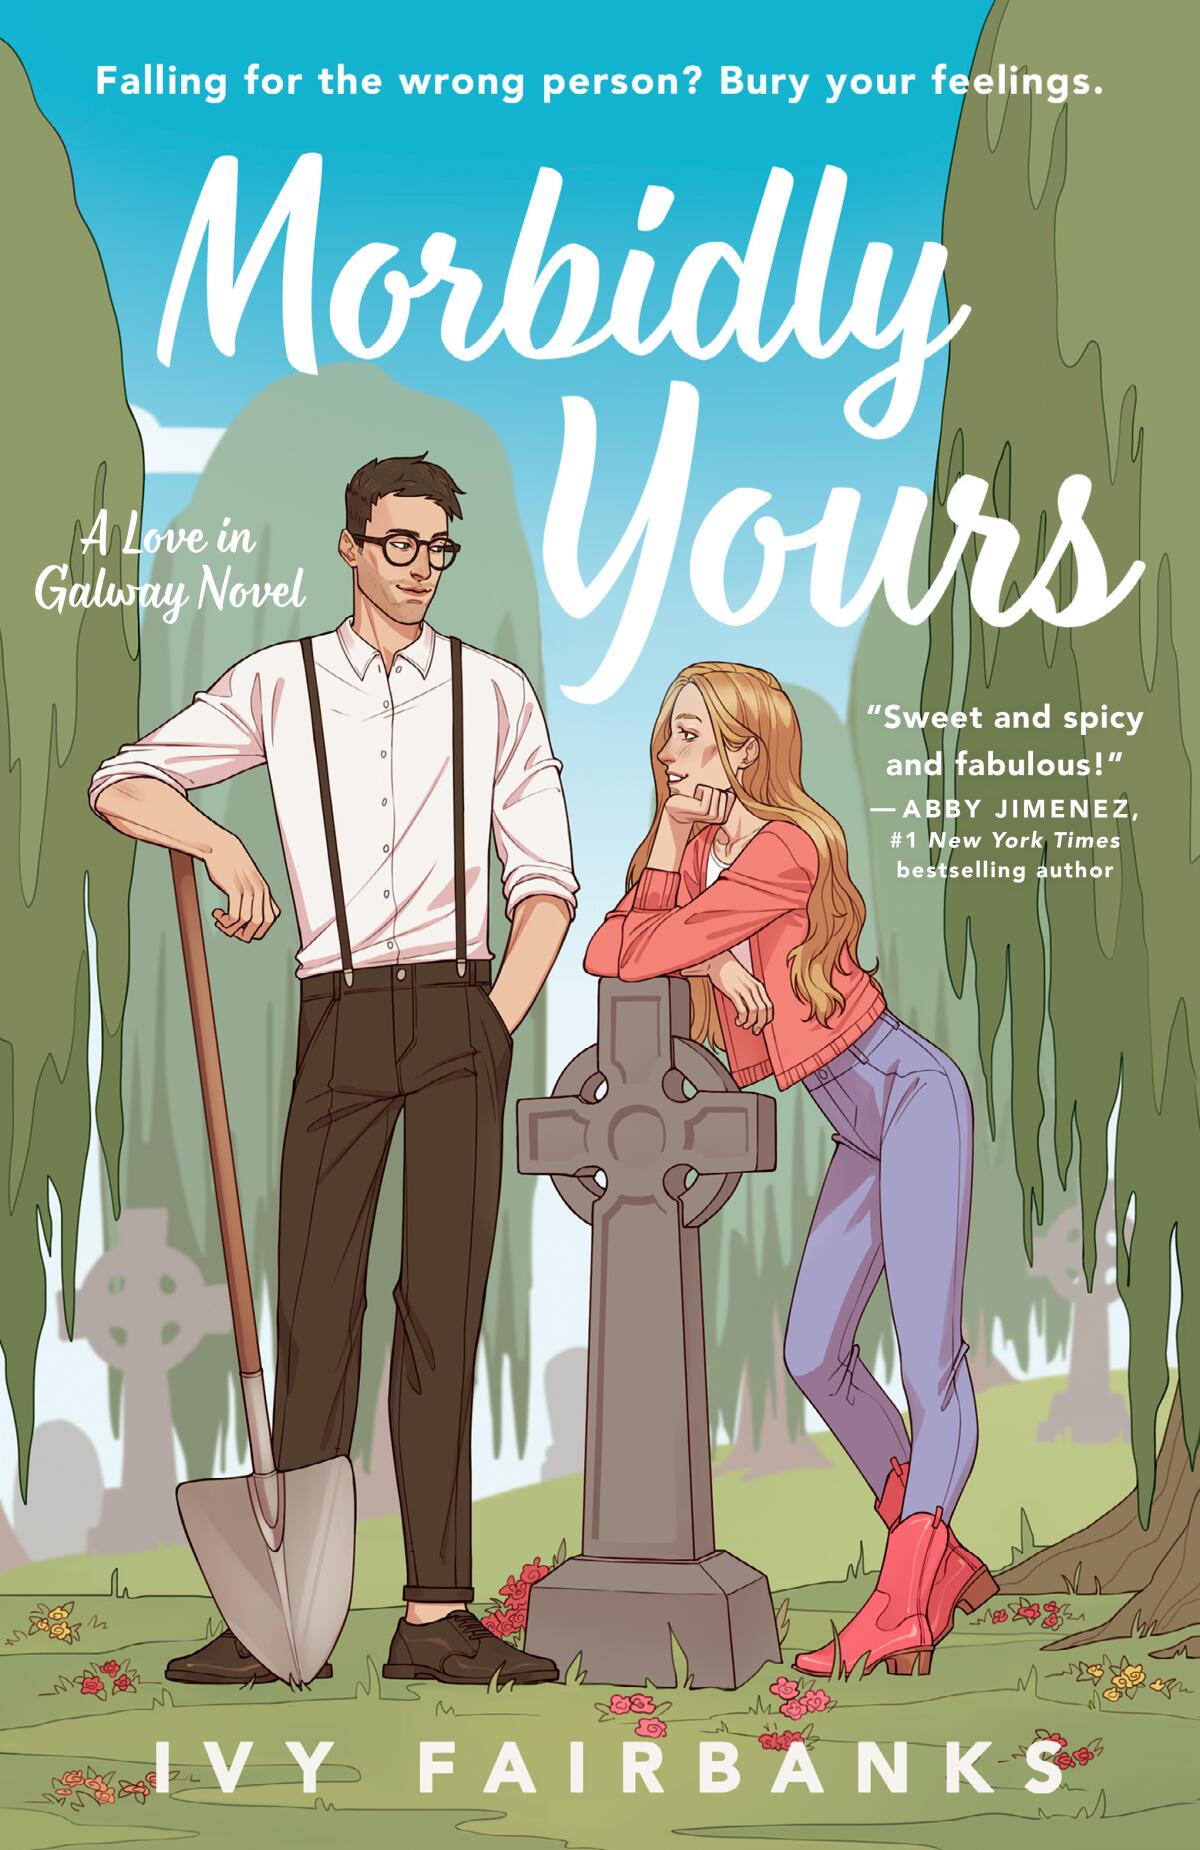 "Morbidly Yours" by Ivy Fairbanks